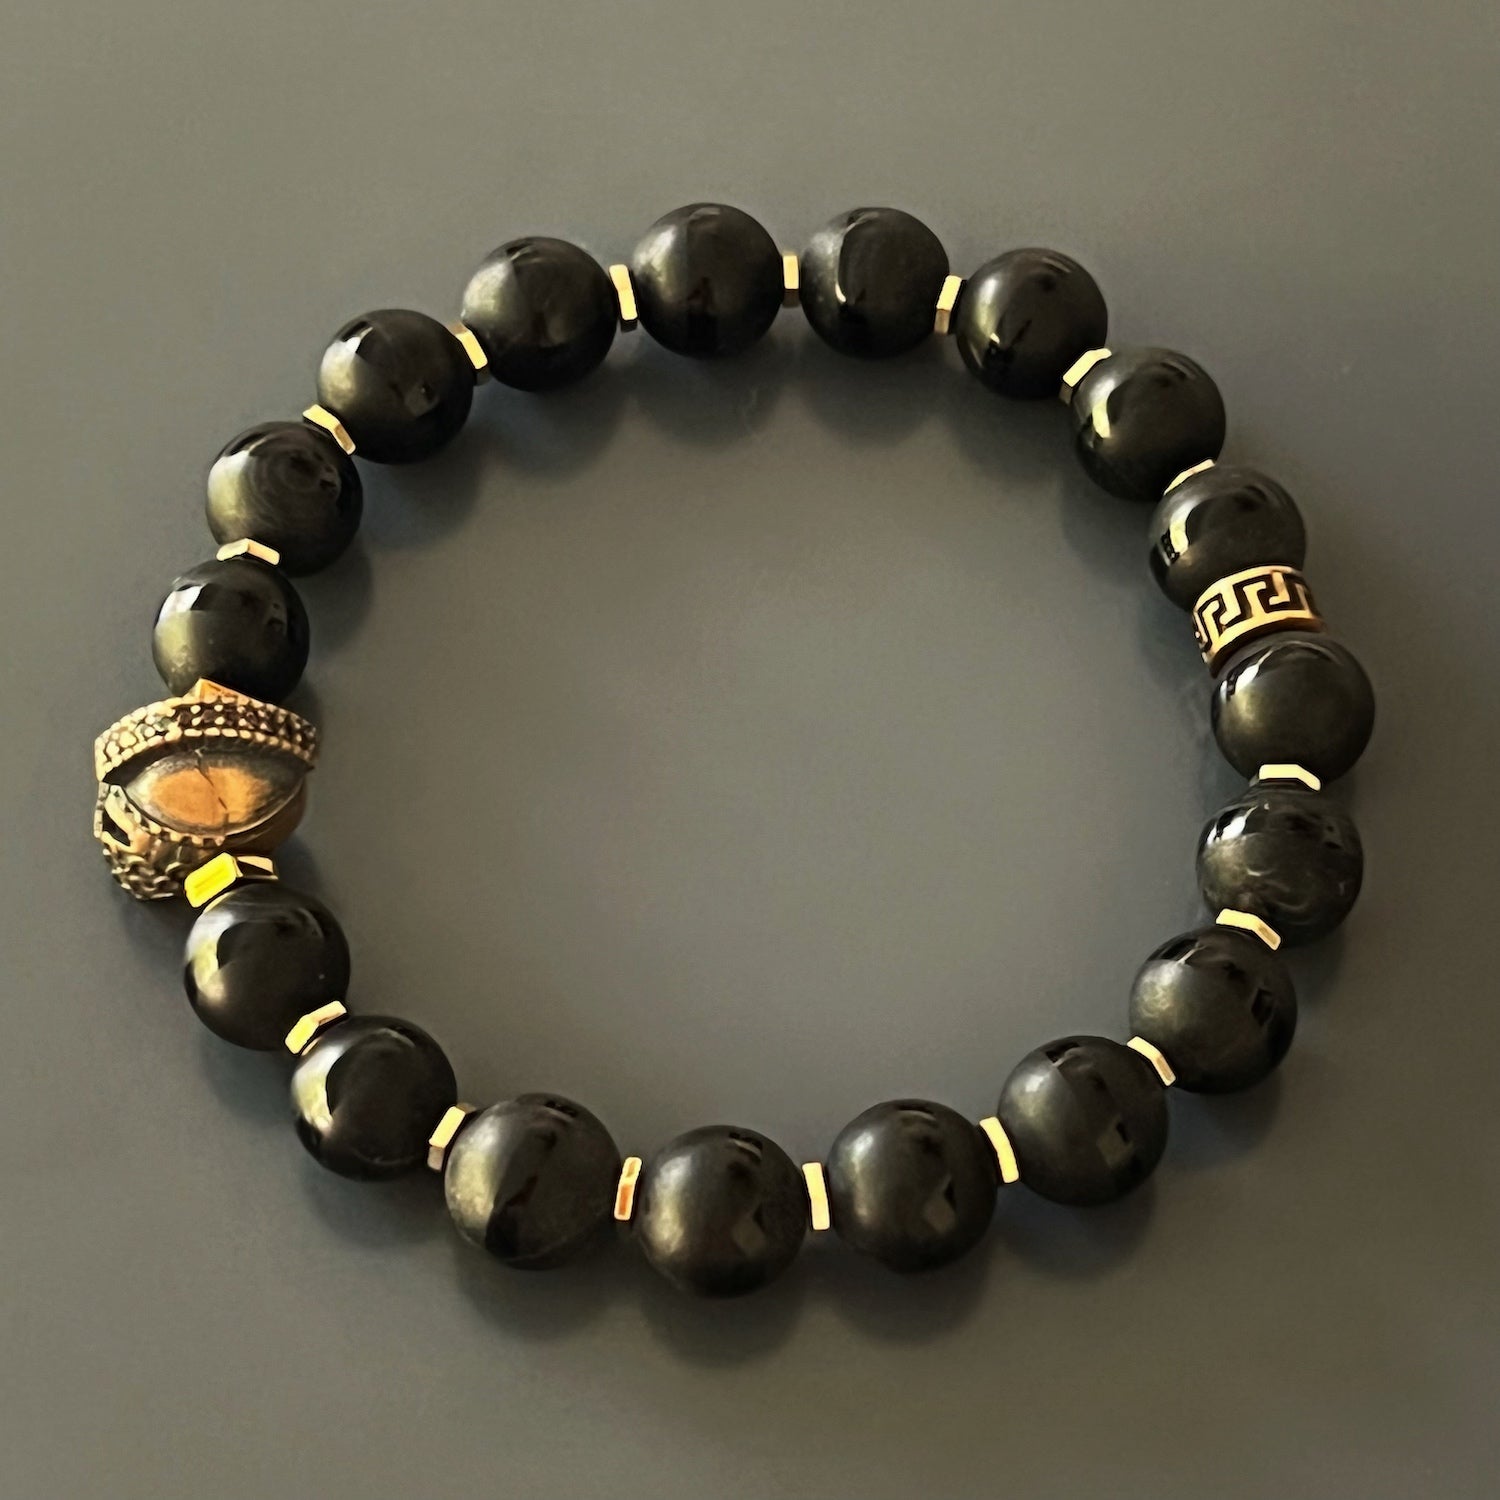 This handmade bracelet is one of a kind and meaningful, just like you.